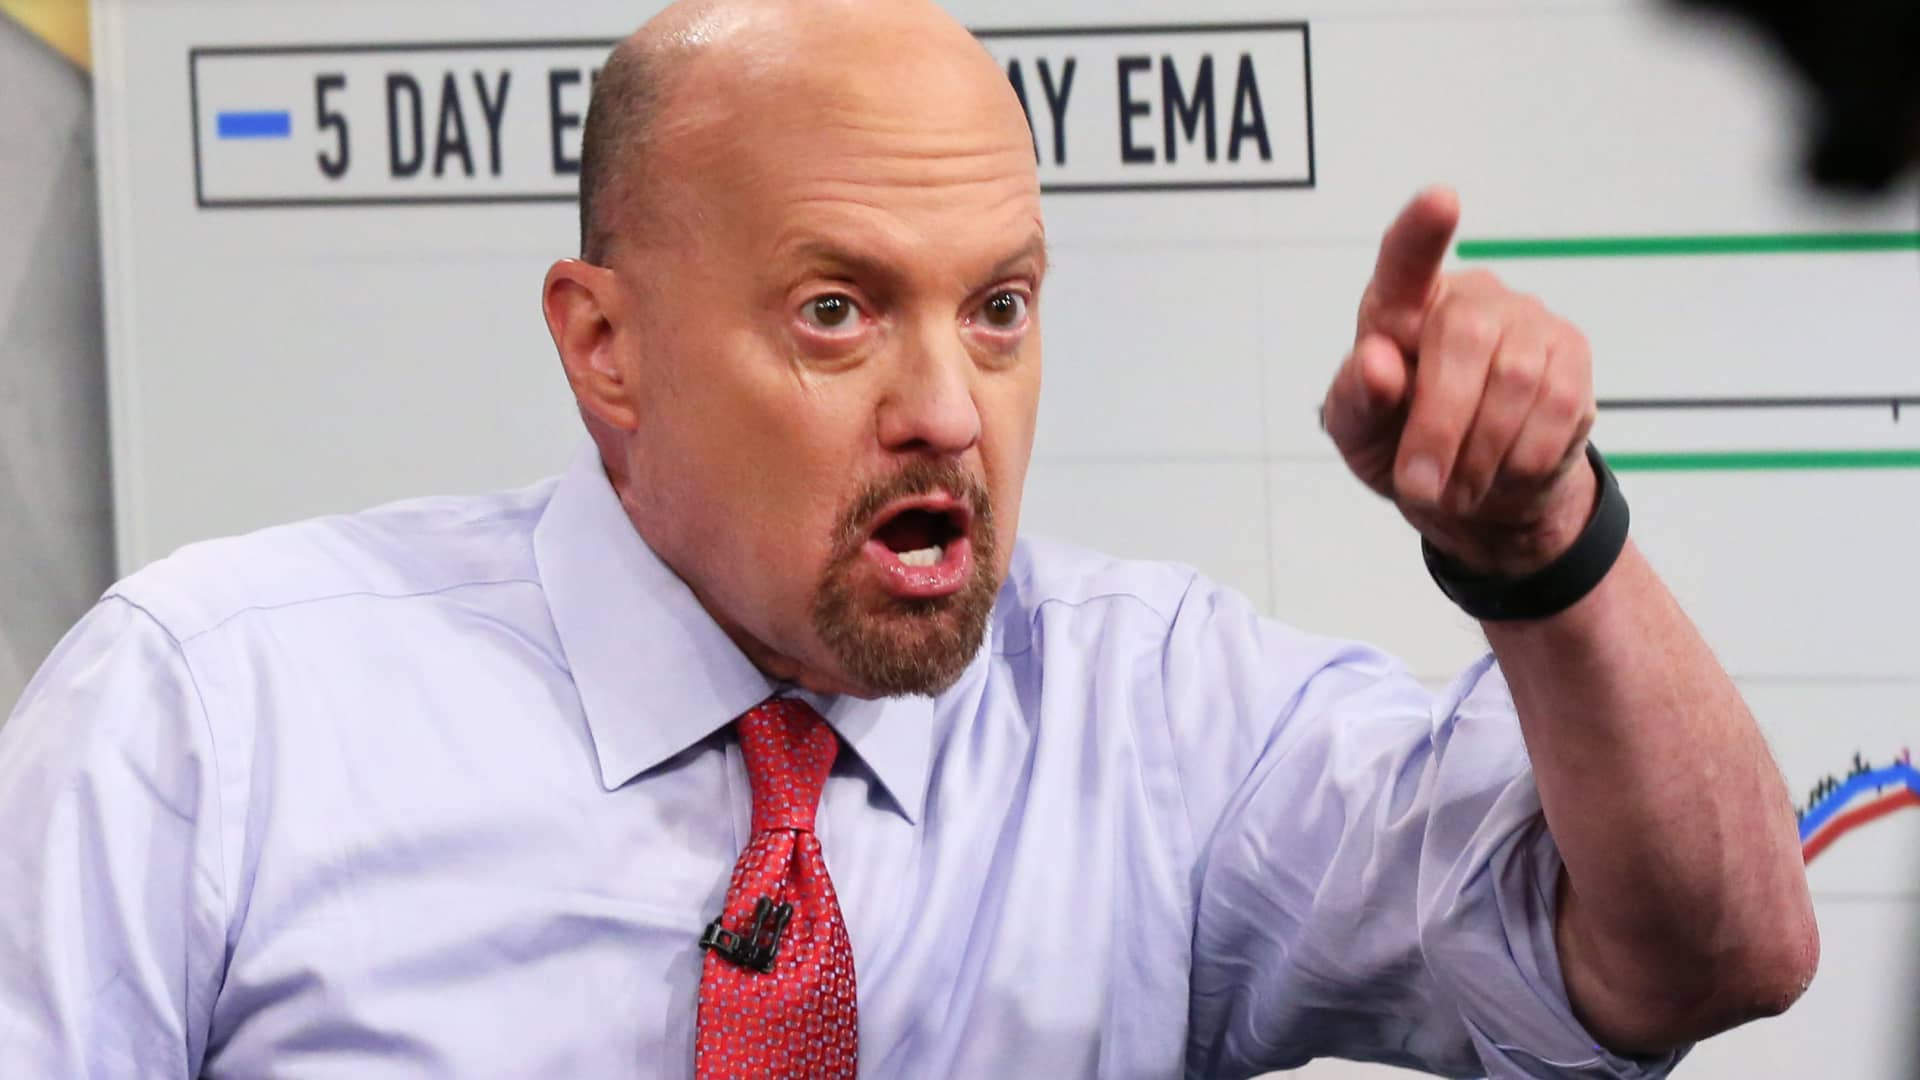 After stocks rebound on Monday, Cramer explains how the market can withhold rallying